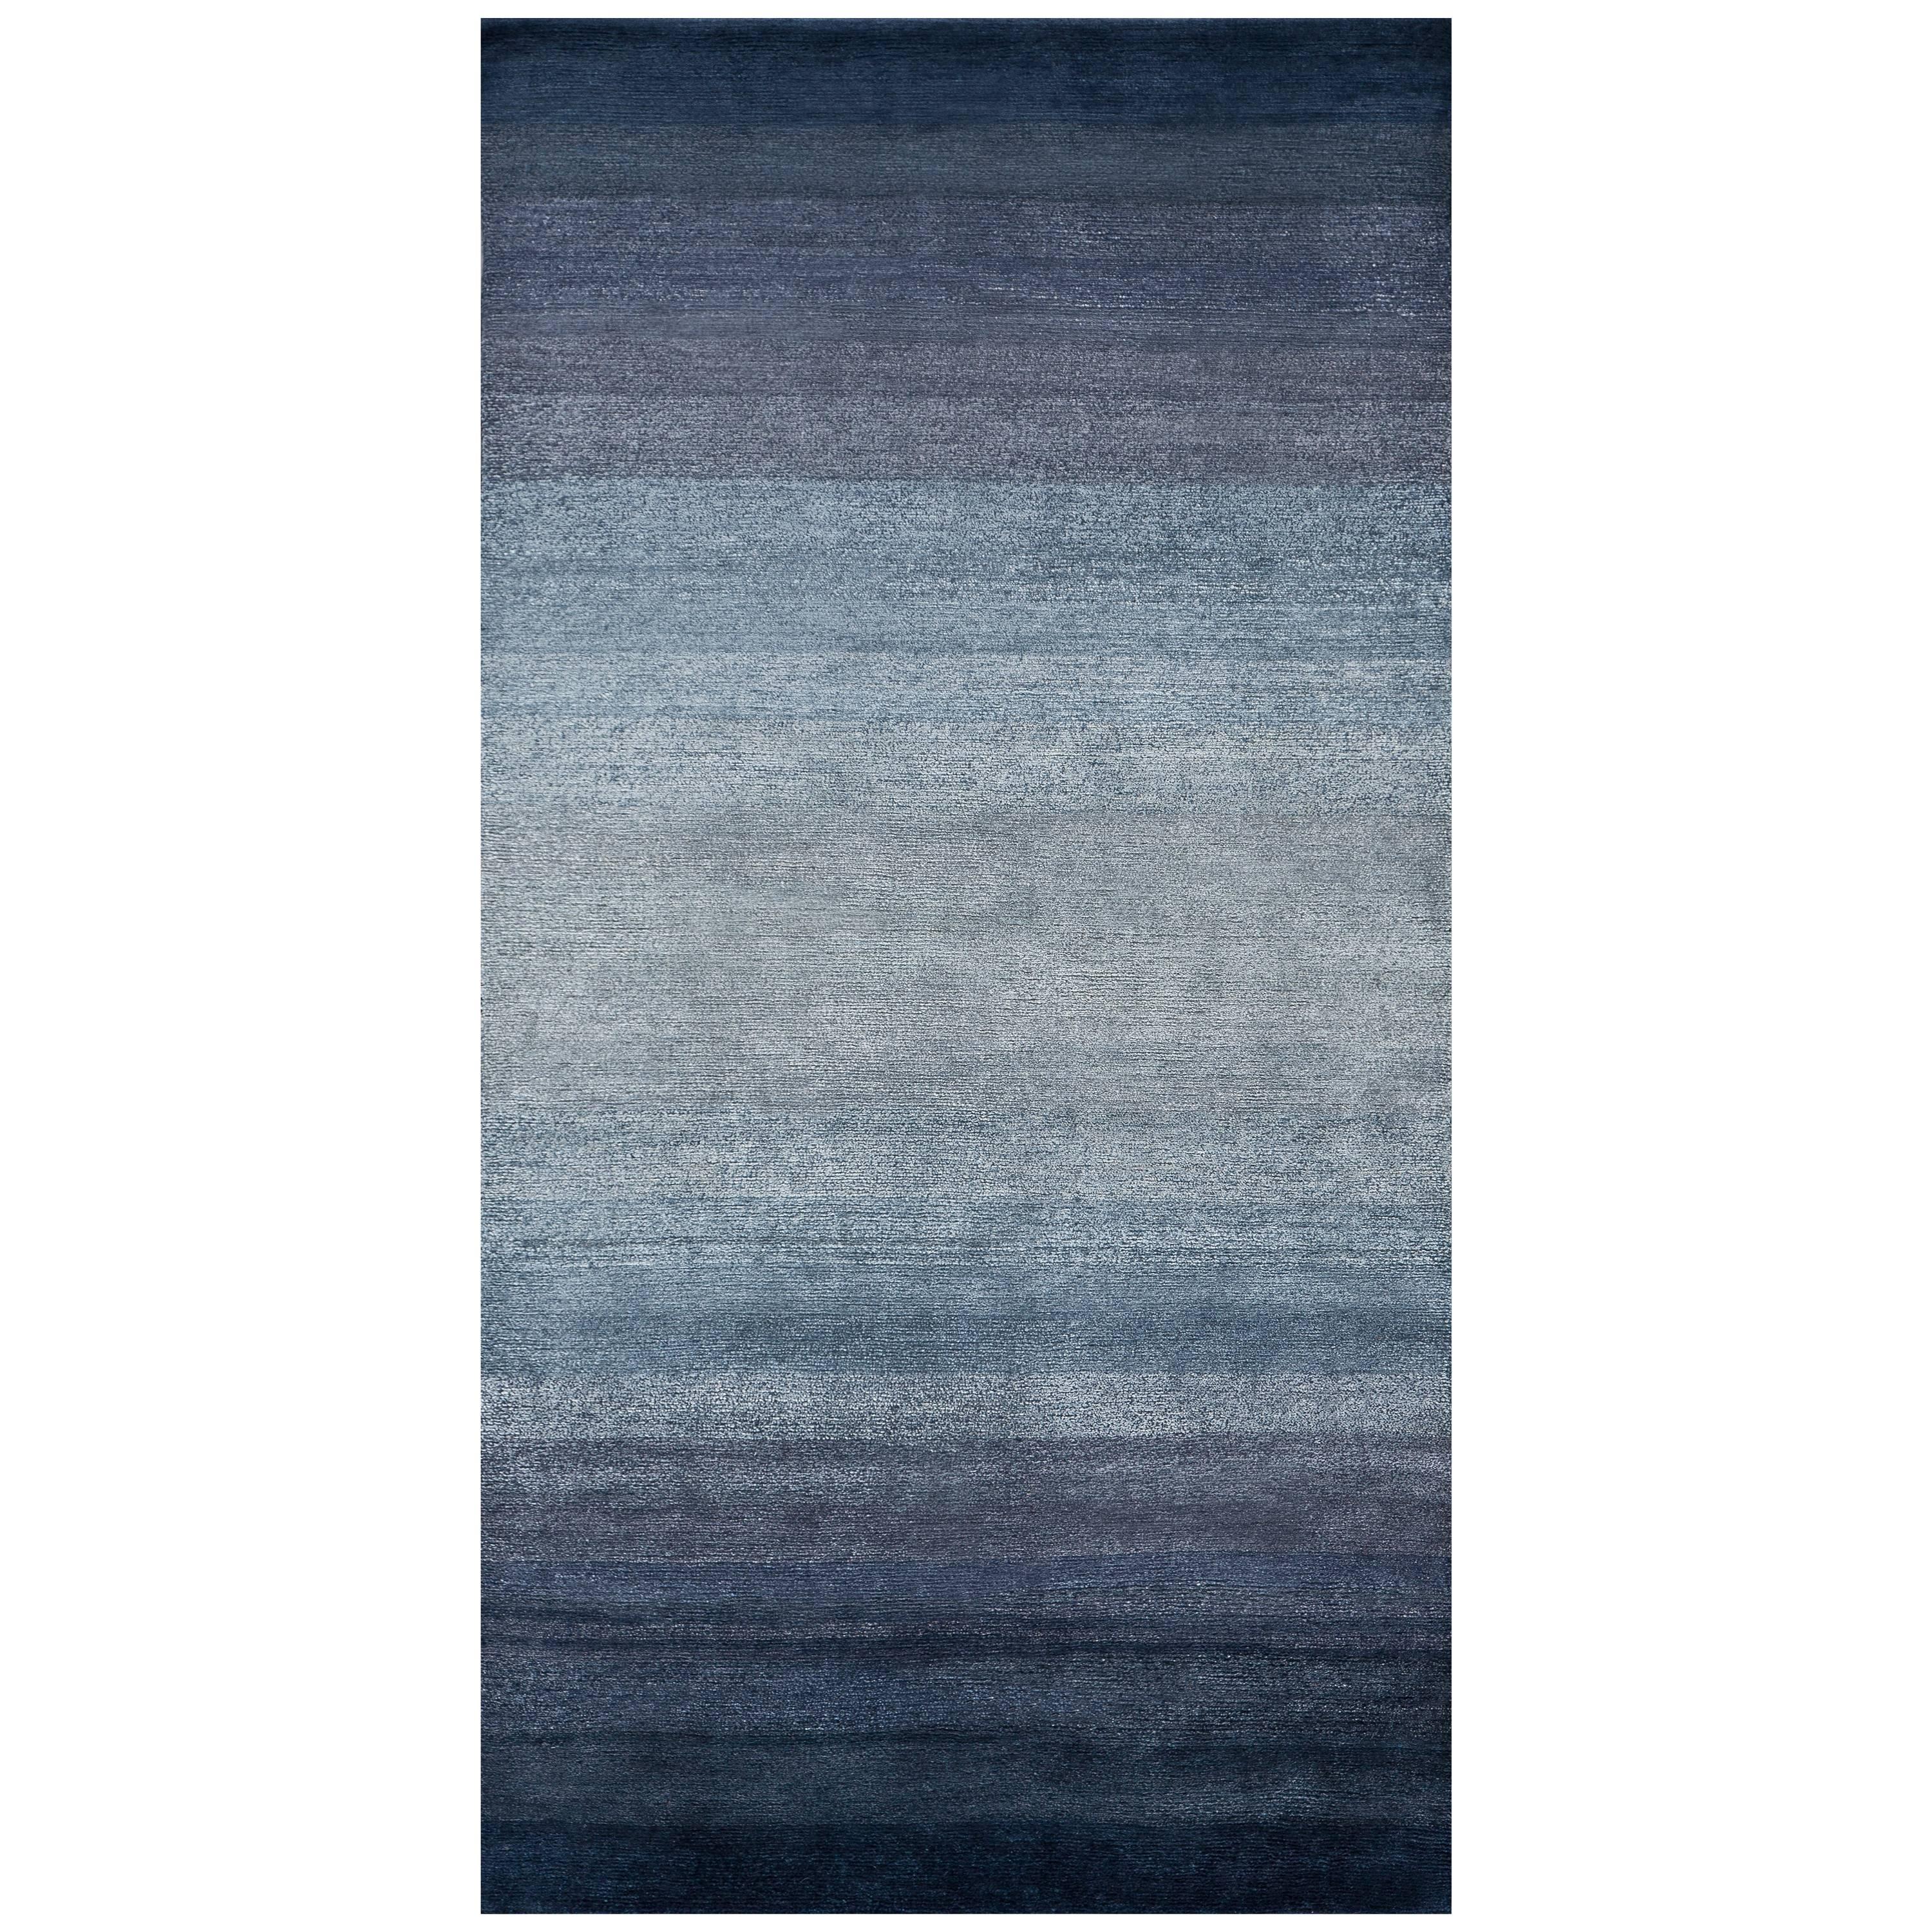 'Fade, Indigo' Hand-Knotted Tibetan Rug Made in Nepal by New Moon Rugs